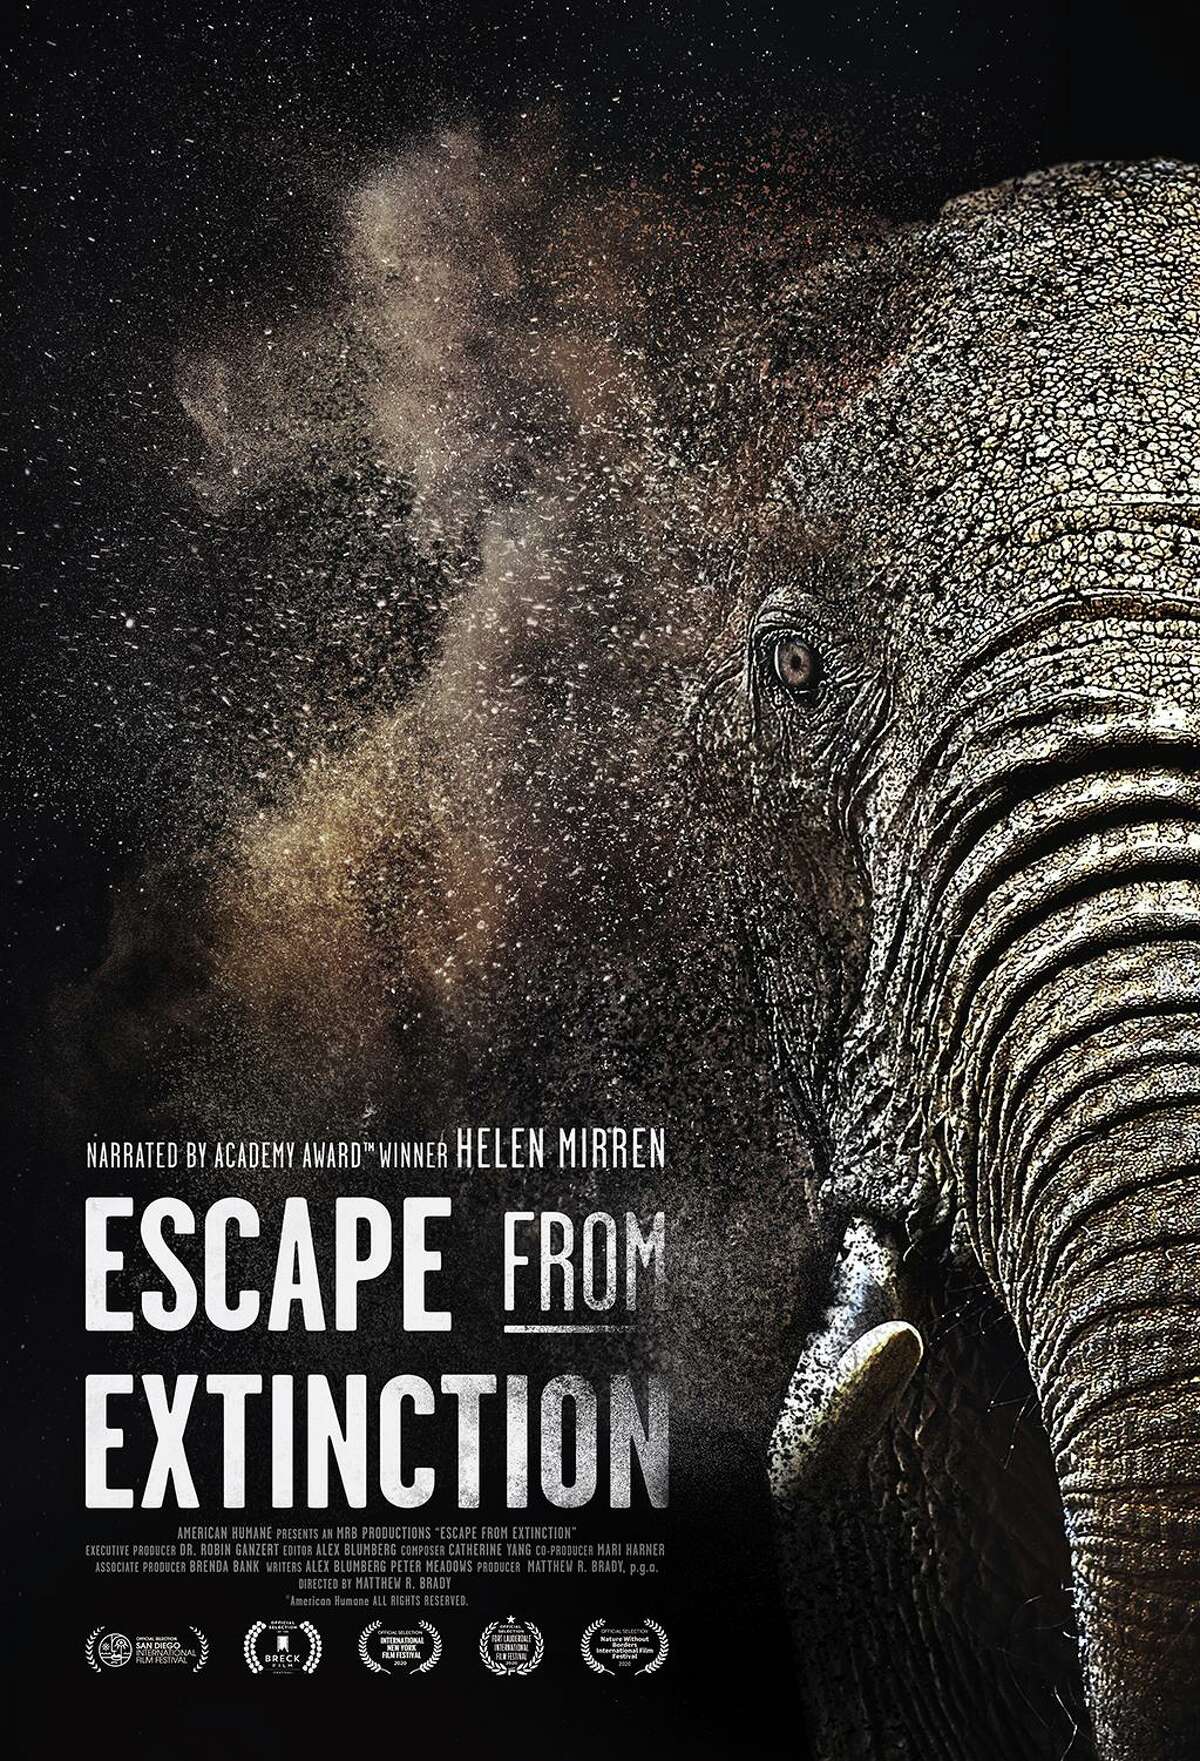 Matthew R. Brady, of Madison, has directed and produced the documentary 'Escape From Extinction,' narrated by Dame Helen Mirren. But, the movie argues, accredited zoos and aquariums often protect animals that might not otherwise survive in the wild, including those that are injured, or that live in a habitat that has been threatened in some way. Brady specifically pointed to the wildfires in Sydney, Australia, earlier this year, and the critical role that zoos played in helping to rescue the animals affected by the blaze. The experts interviewed in the movie all agree that unaccredited zoos and aquariums can be harmful. The example highlighted in “Escaping Extinction” is the Greater Wynnewood Exotic Animal Park, made famous by the Netflix documentary series “Tiger King.” The establishment closed to the public this summer. Yet places like this don’t represent the greater zoo culture at all, Brady says. “We try to be really clear (in the movie) that there’s a difference between (high-quality zoo) and ‘Tiger King,’ ” he says. “The whole point of this movie is ‘Let’s get behind these organizations that are helping animals and support them.’ ”  